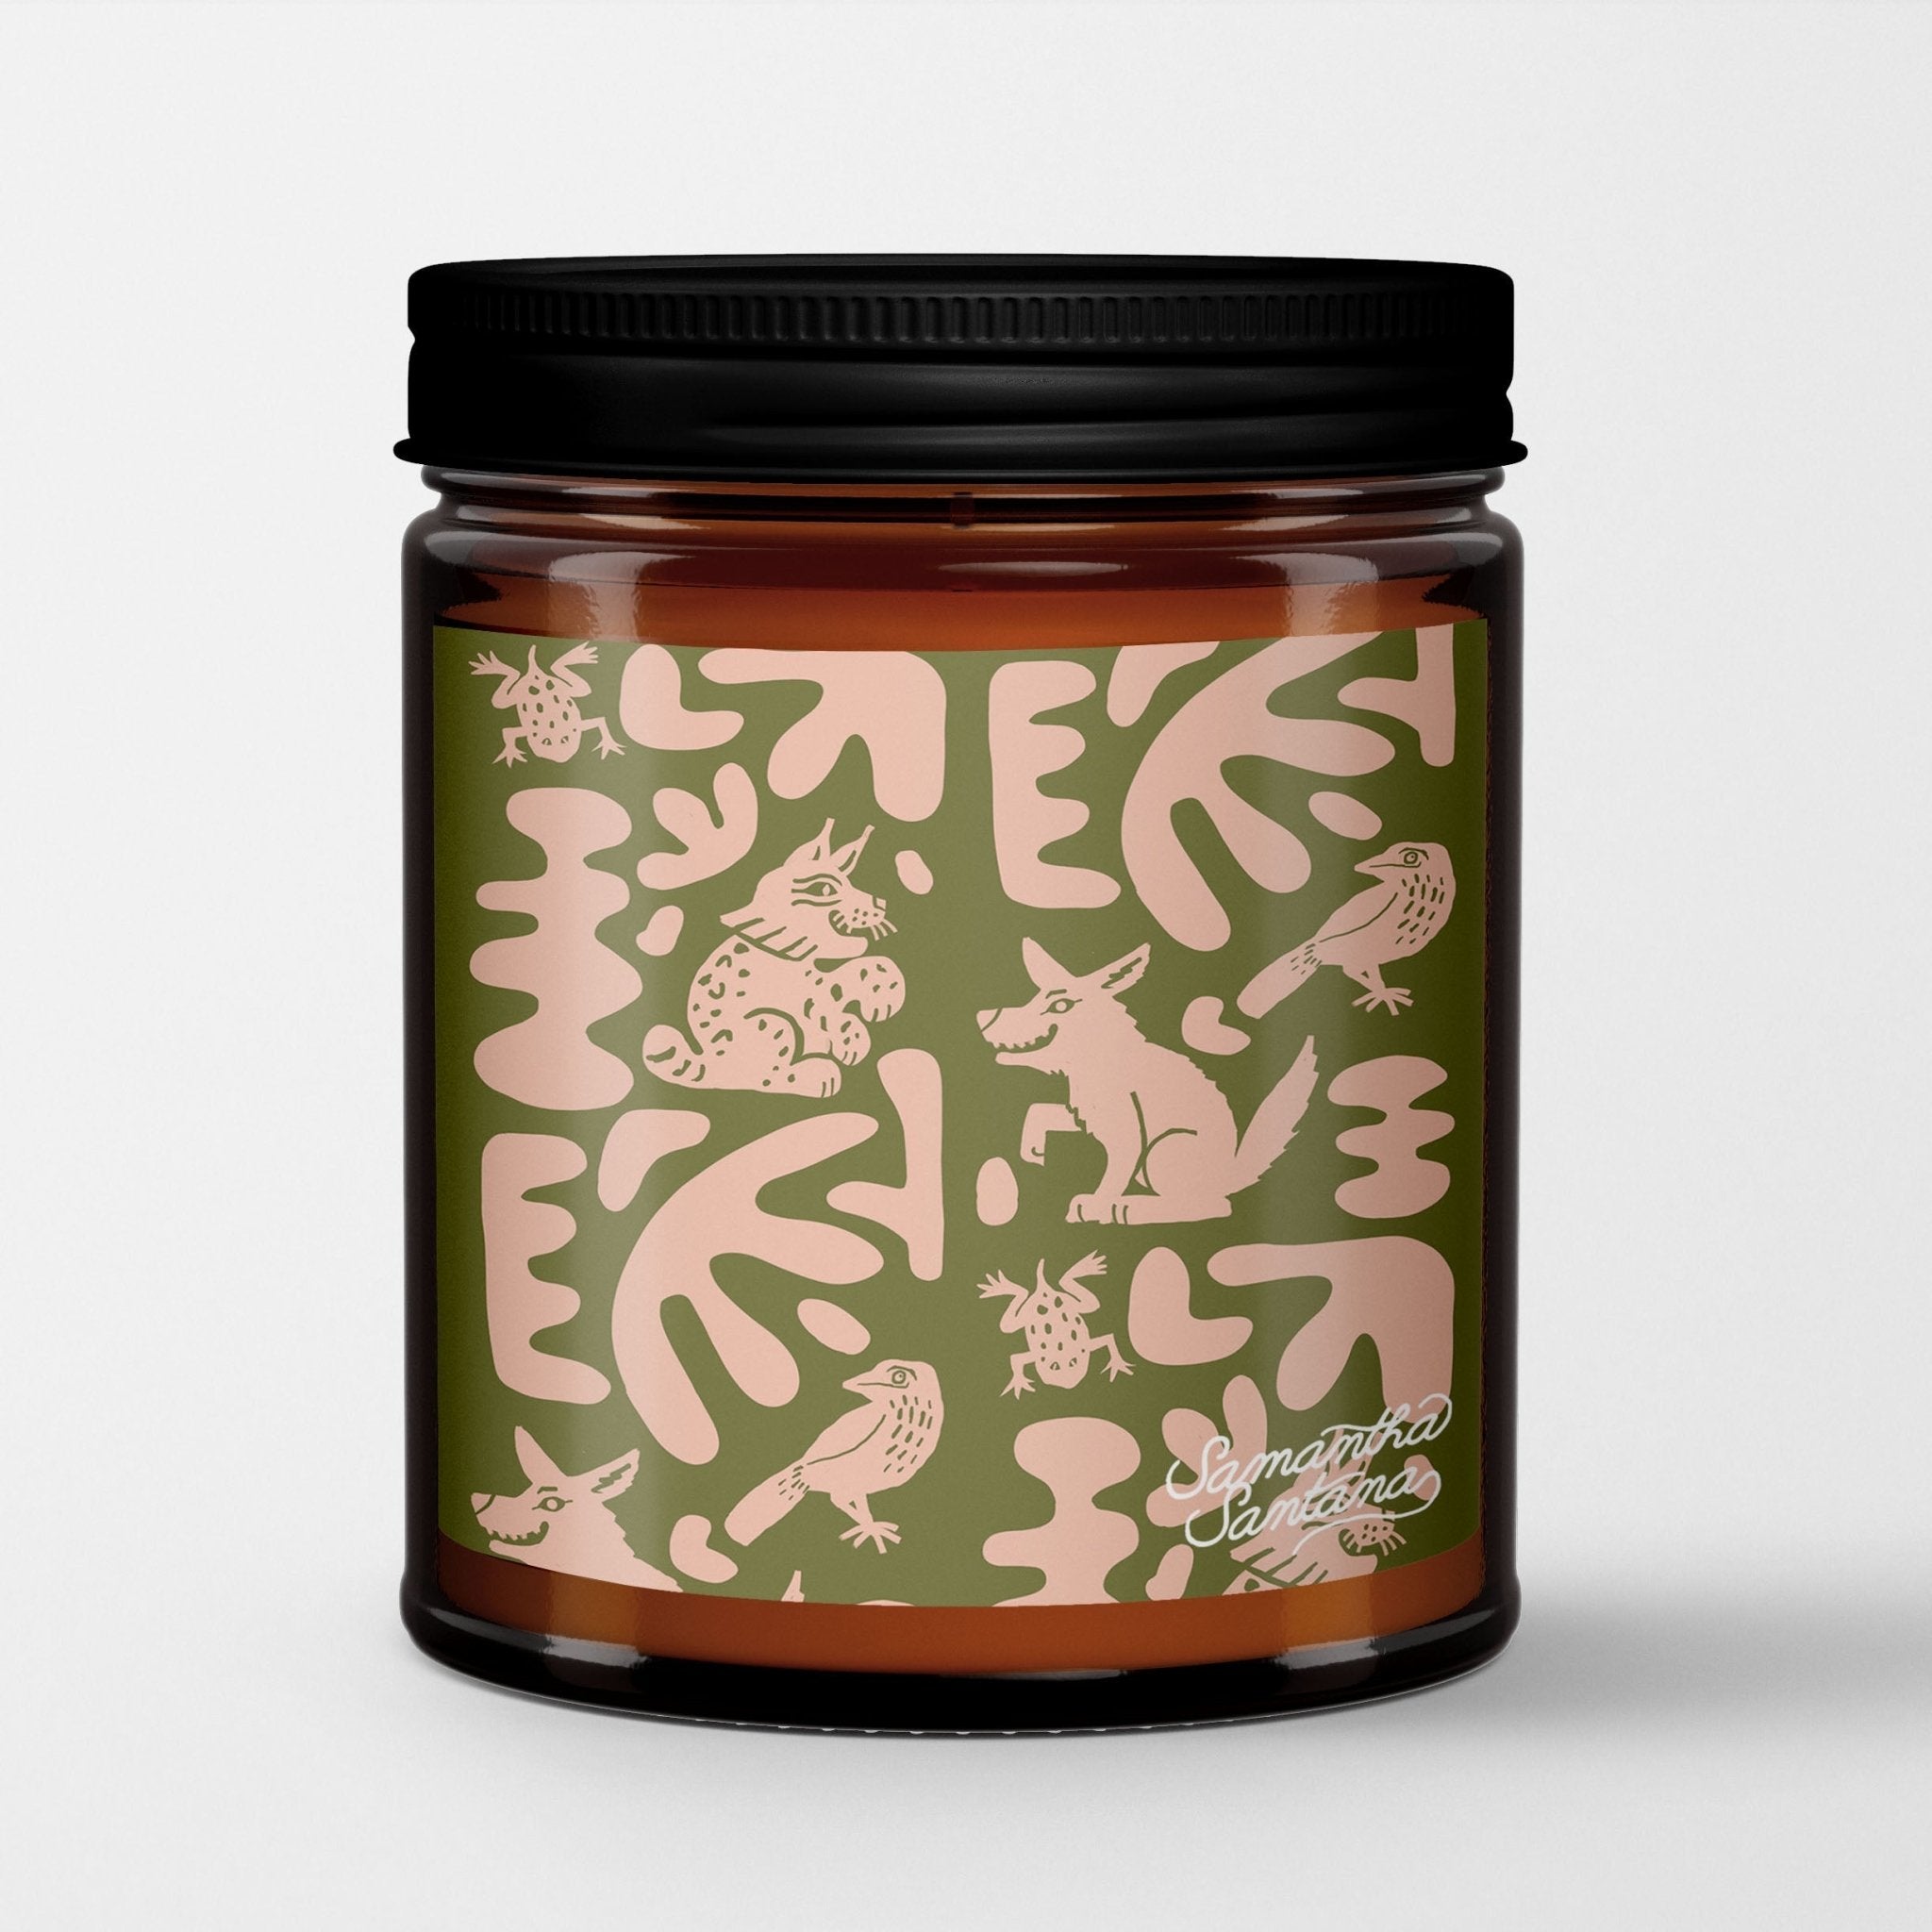 Samantha Santana Scented Candle in Amber Glass Jar: Abstract Animales - Candlefy